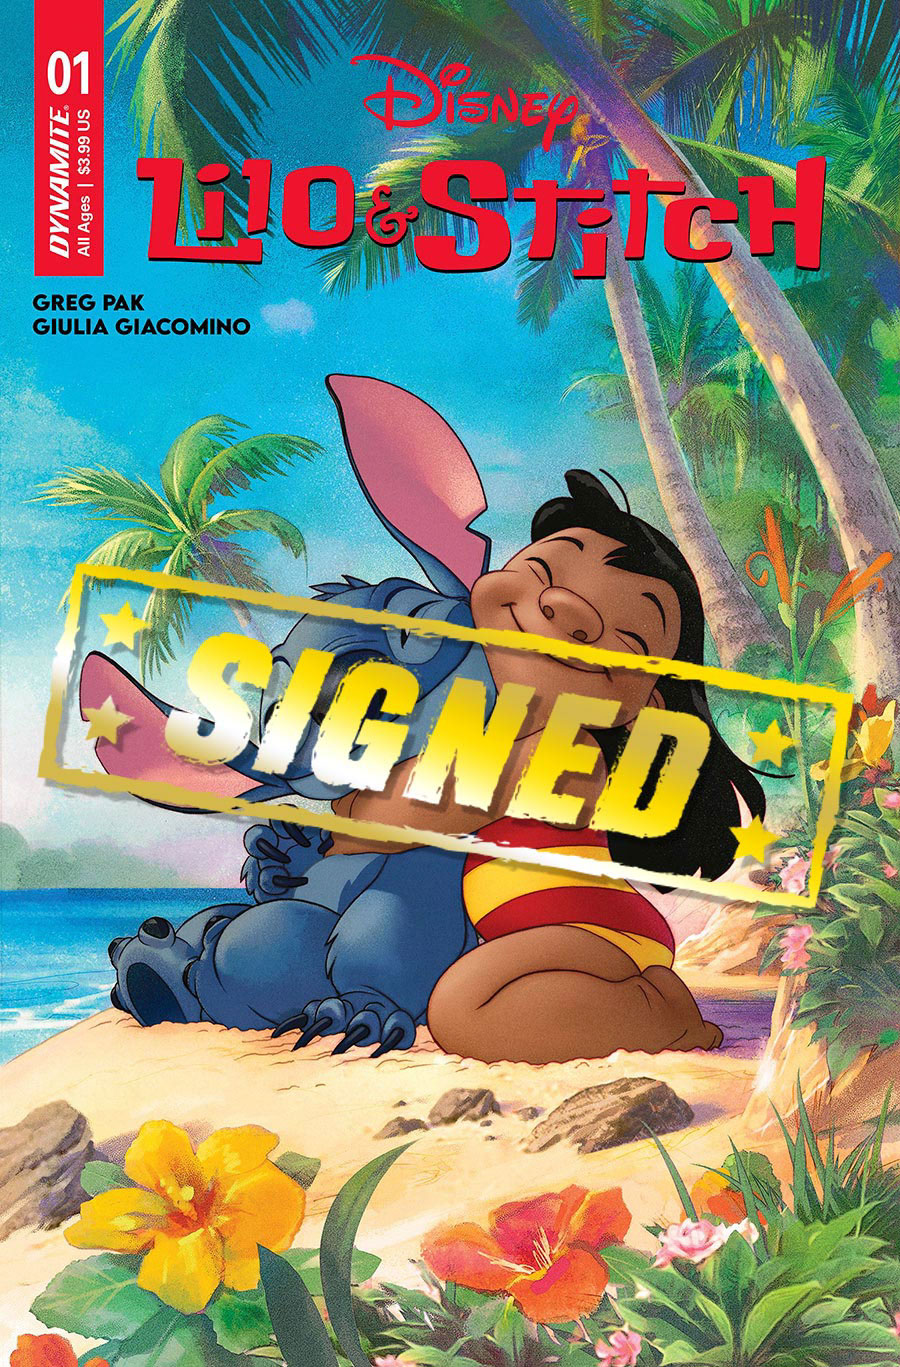 Lilo & Stitch #1 Cover S Regular Joshua Middleton Cover Signed By Greg Pak Moana McAdams & Nathan Cosby